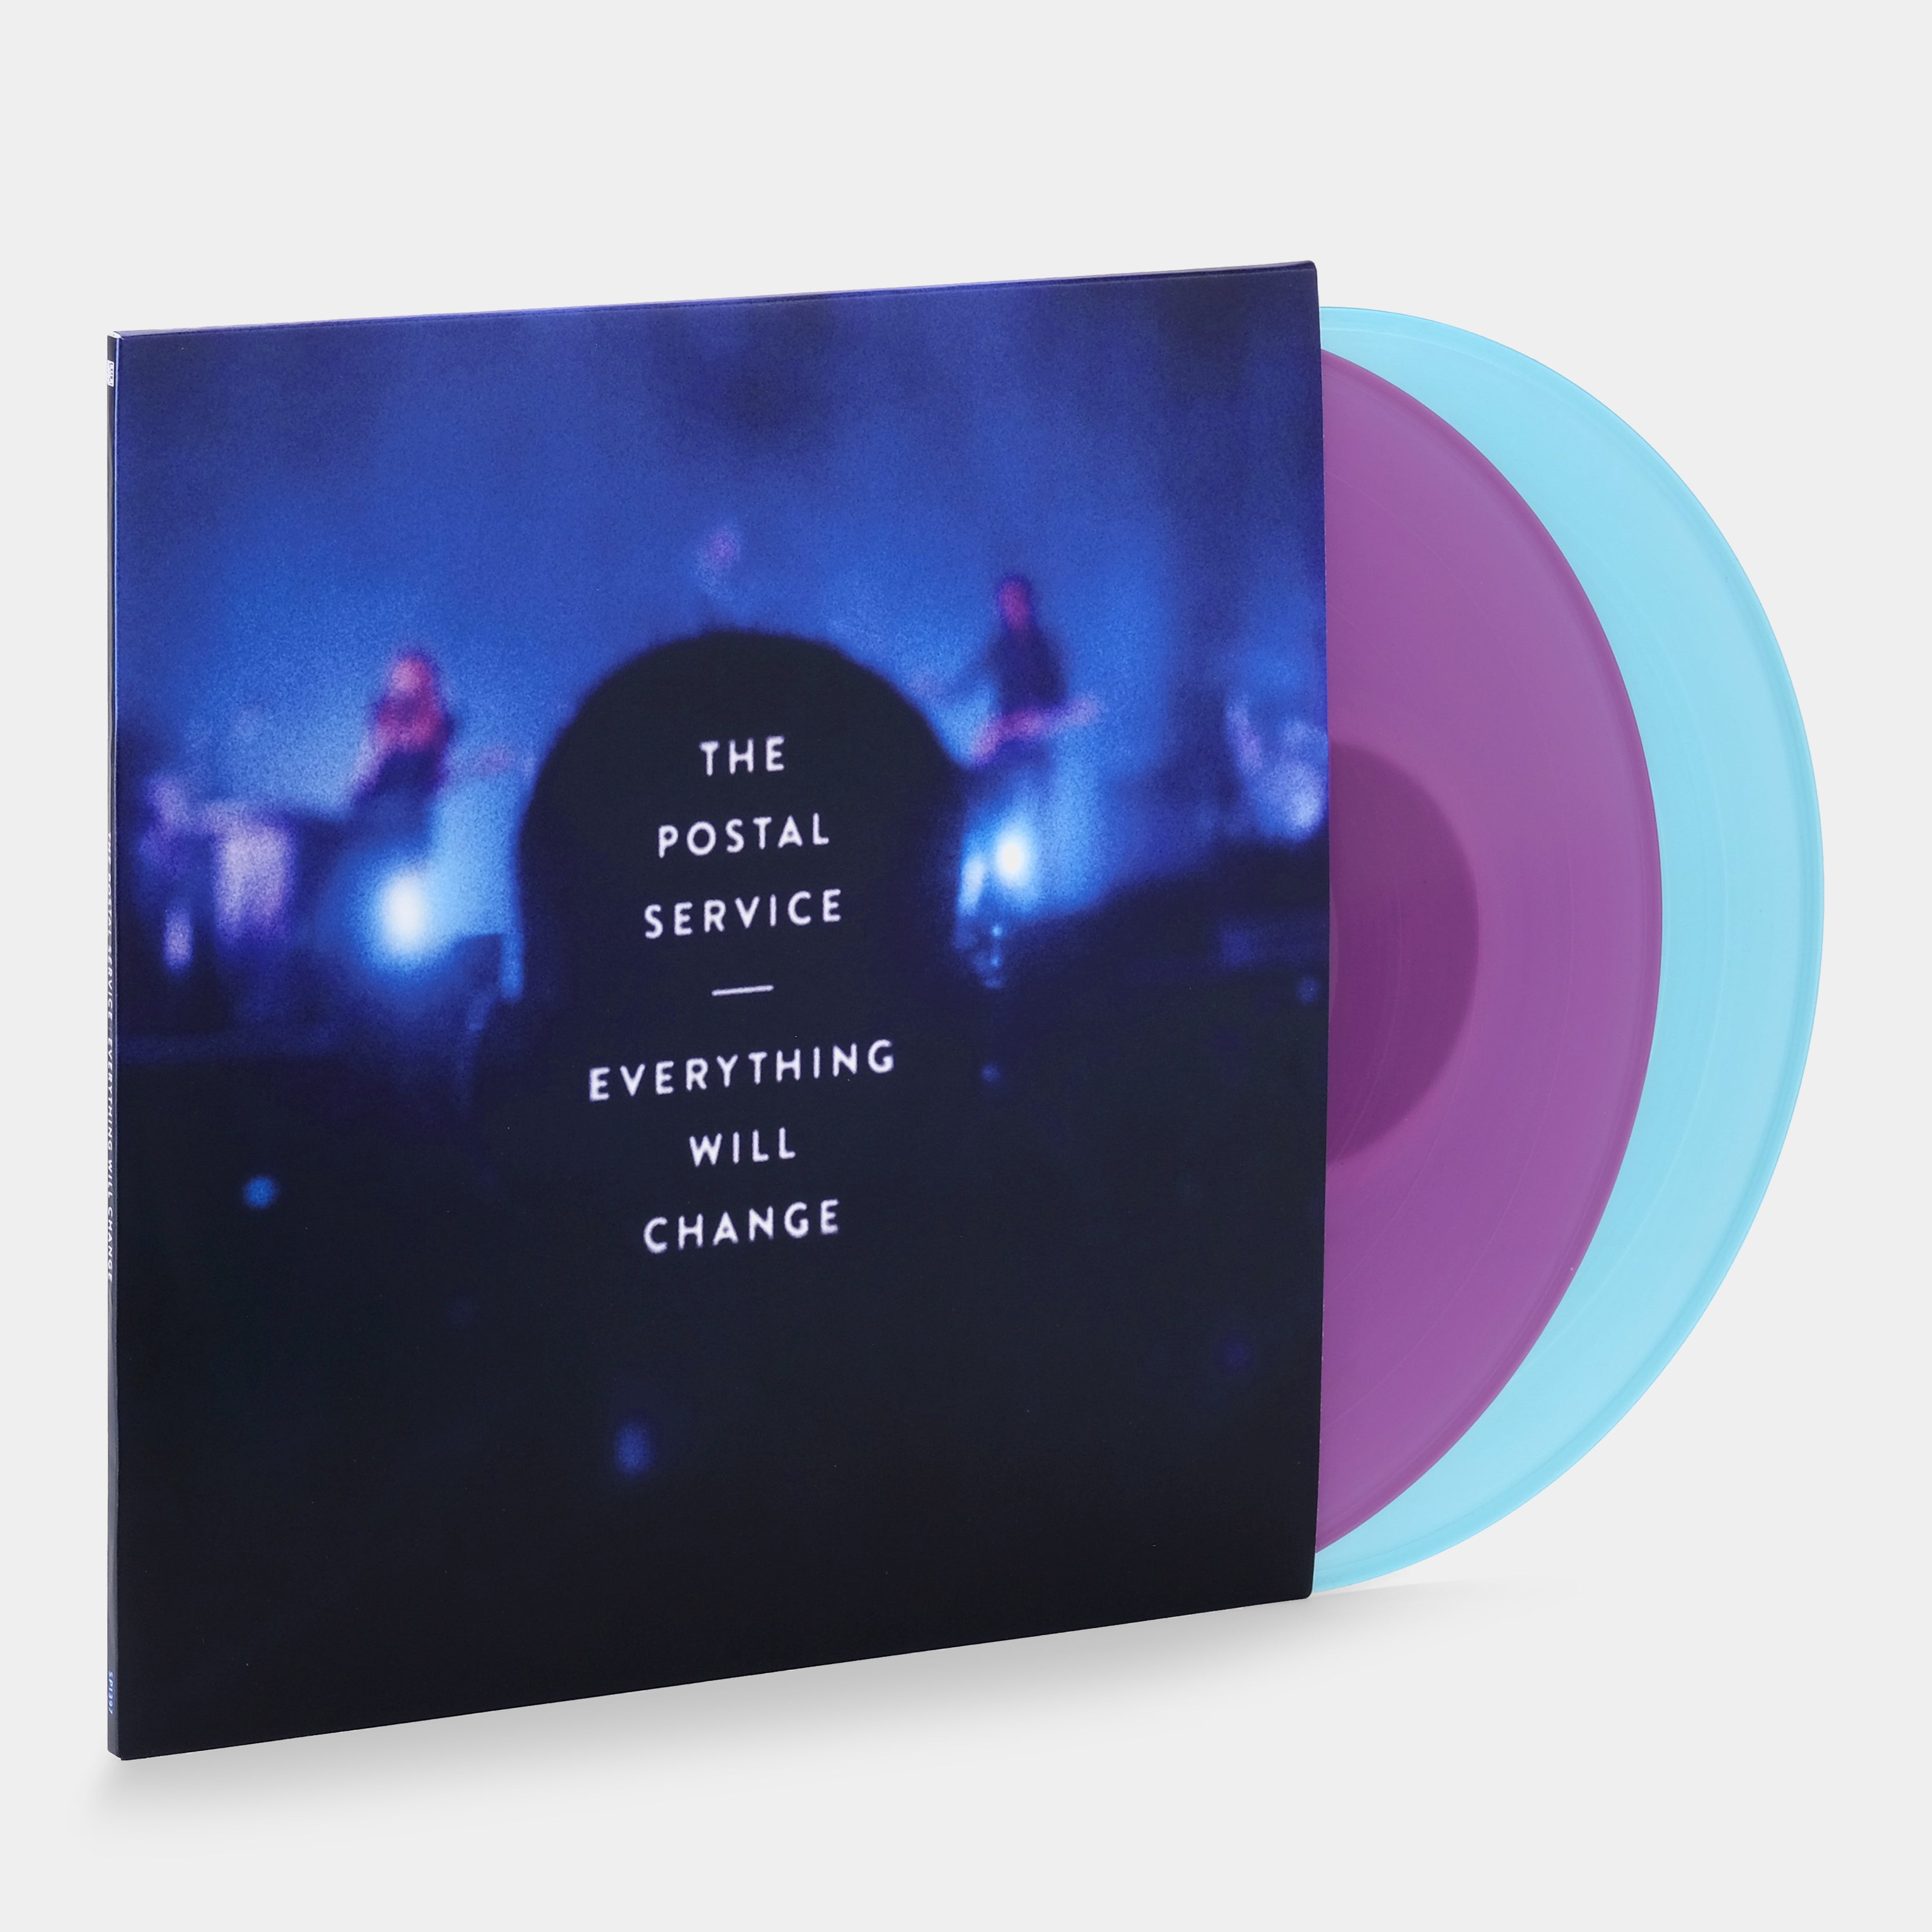 The Postal Service - Everything Will Change (Loser Edition) 2xLP Lavender and Blue Vinyl Record